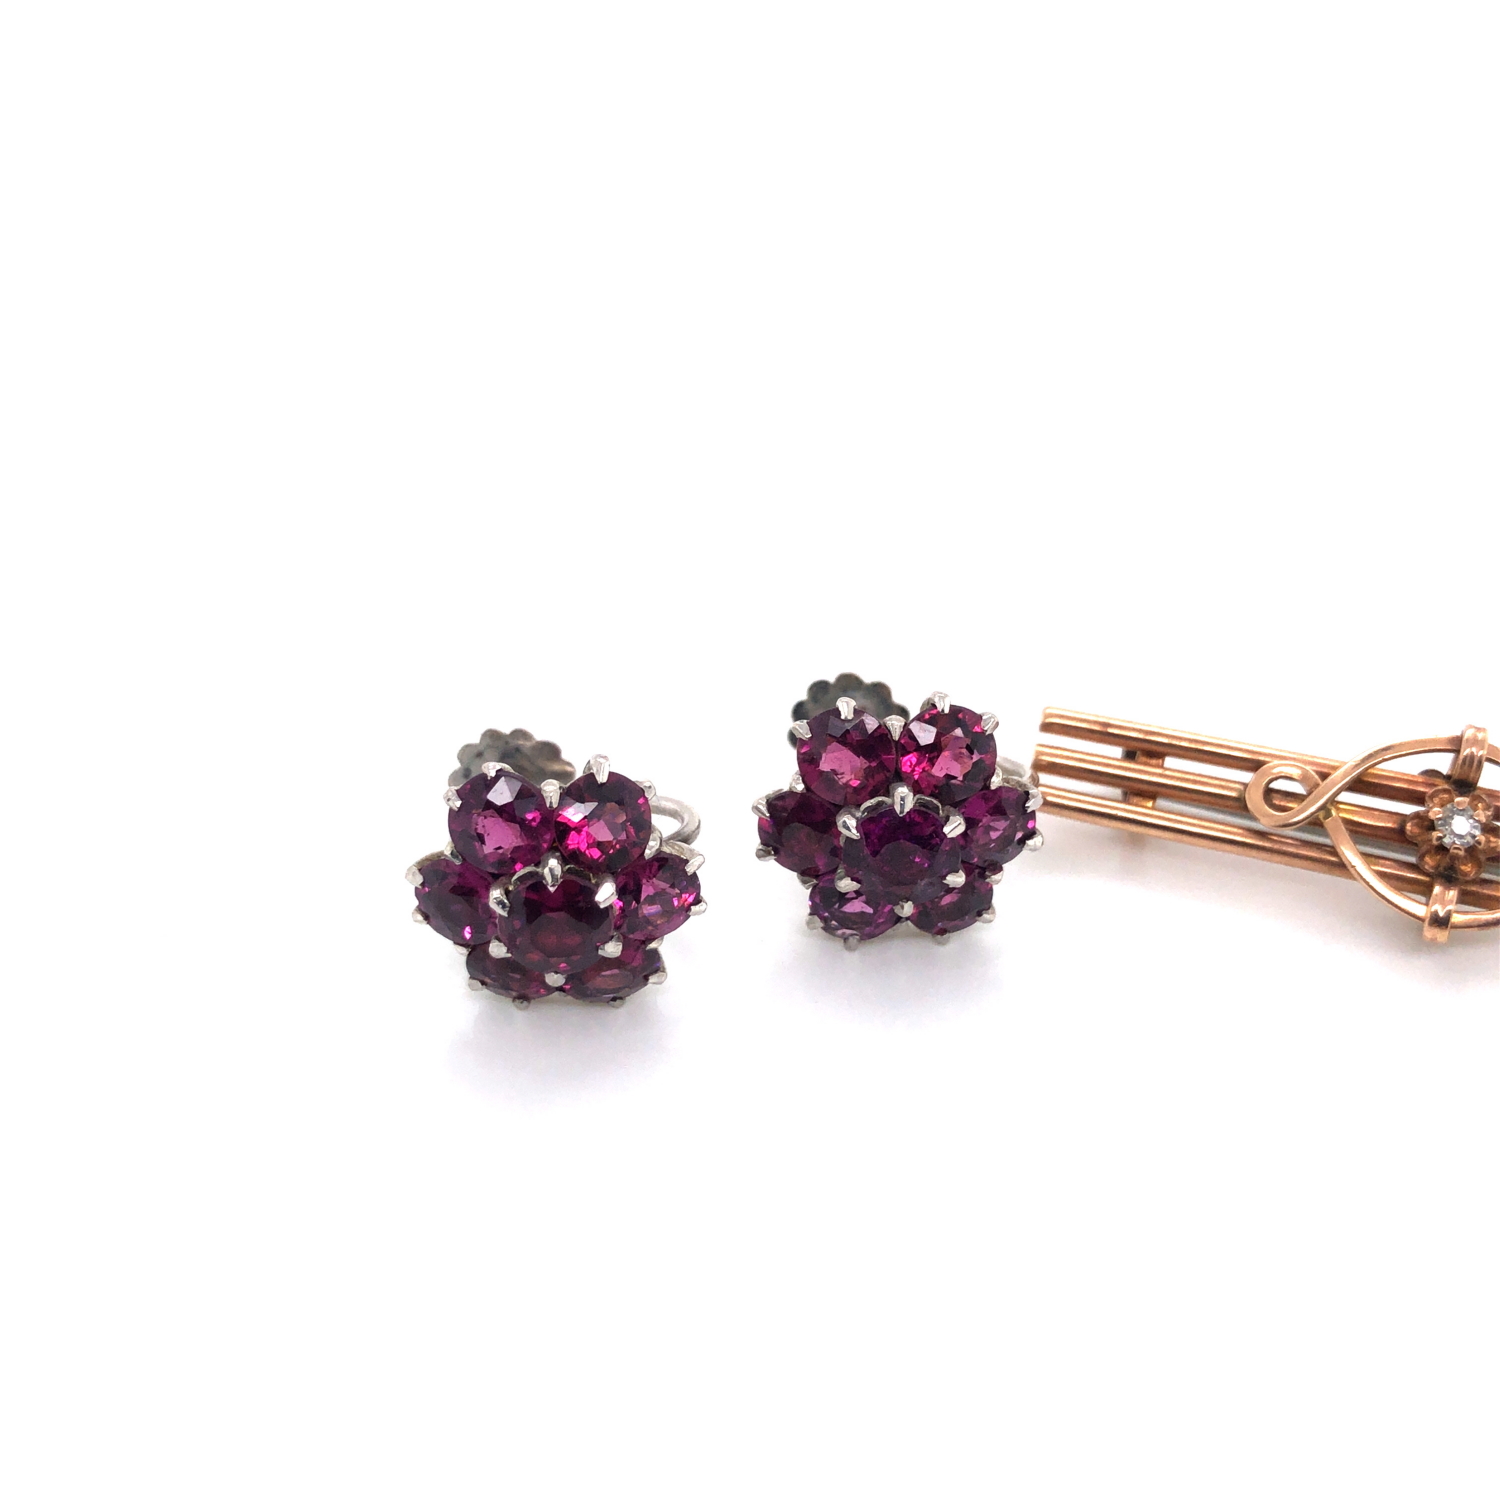 A PAIR OF VINTAGE PINK SAPPHIRE CLUSTER EARRINGS FITTED WITH SCREW BACKS, TOGETHER WITH A VINTAGE - Image 4 of 4